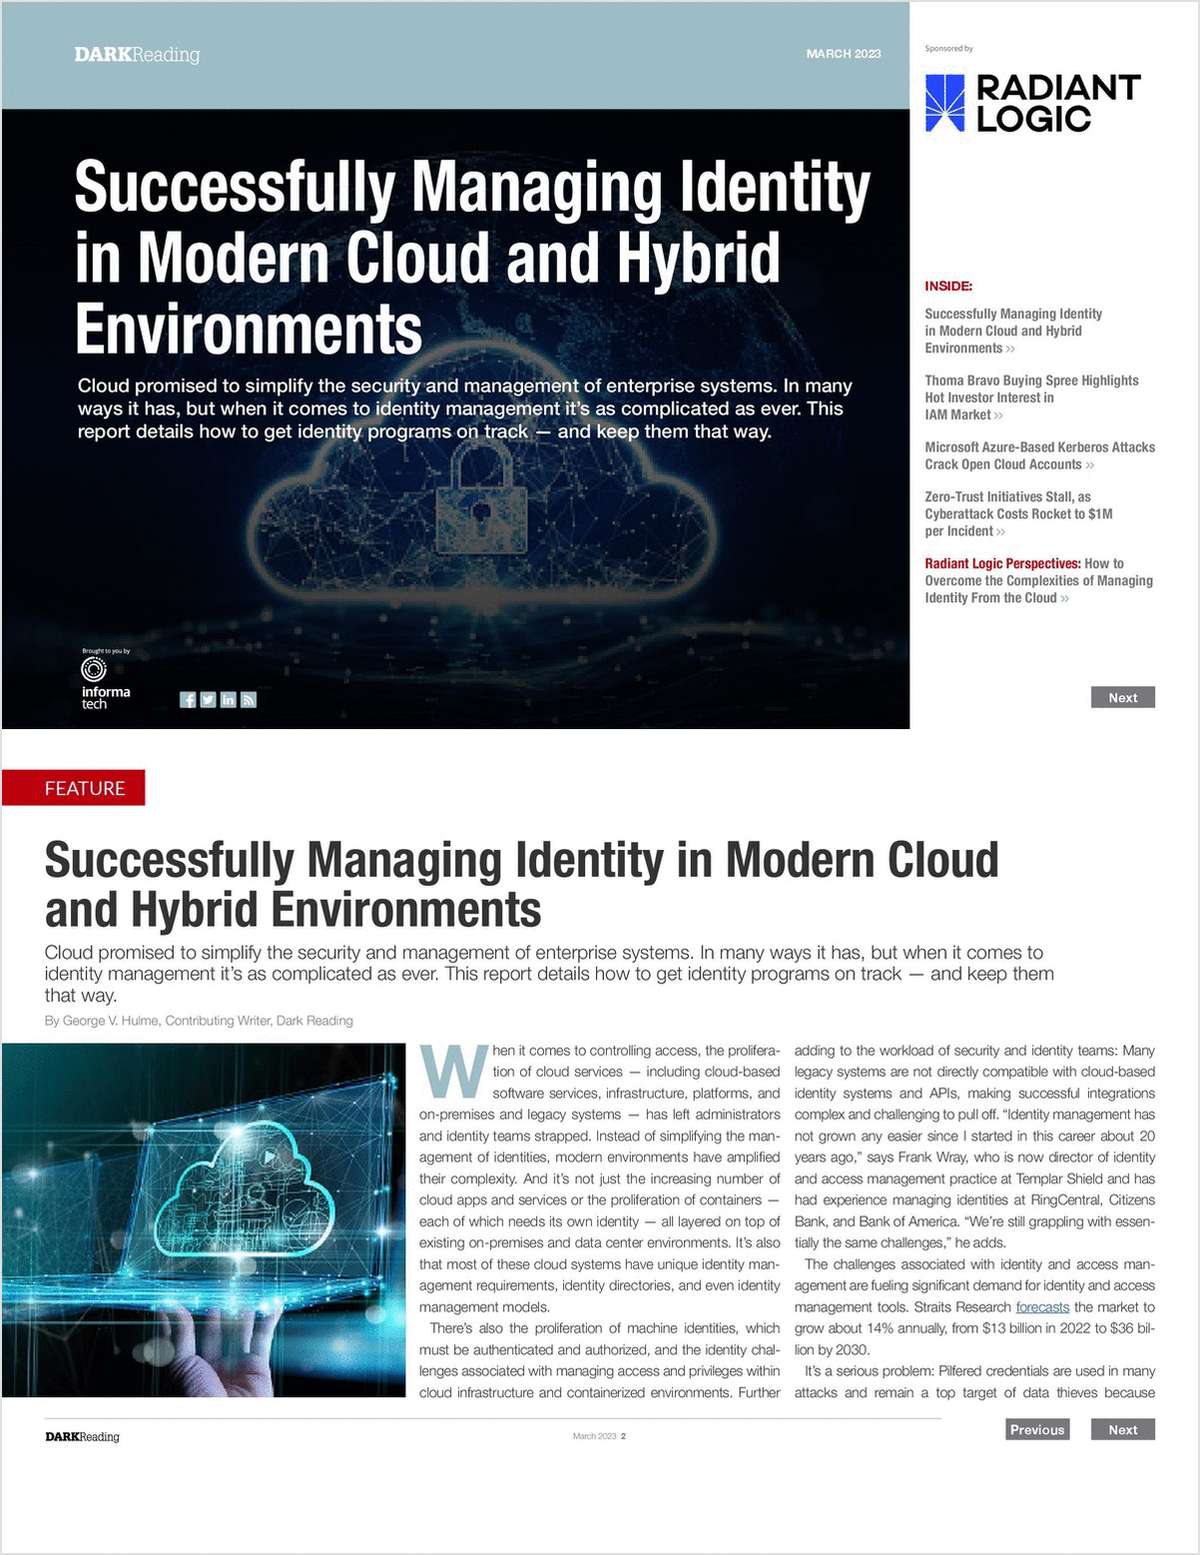 Successfully Managing Identity in Modern Cloud and Hybrid Environments